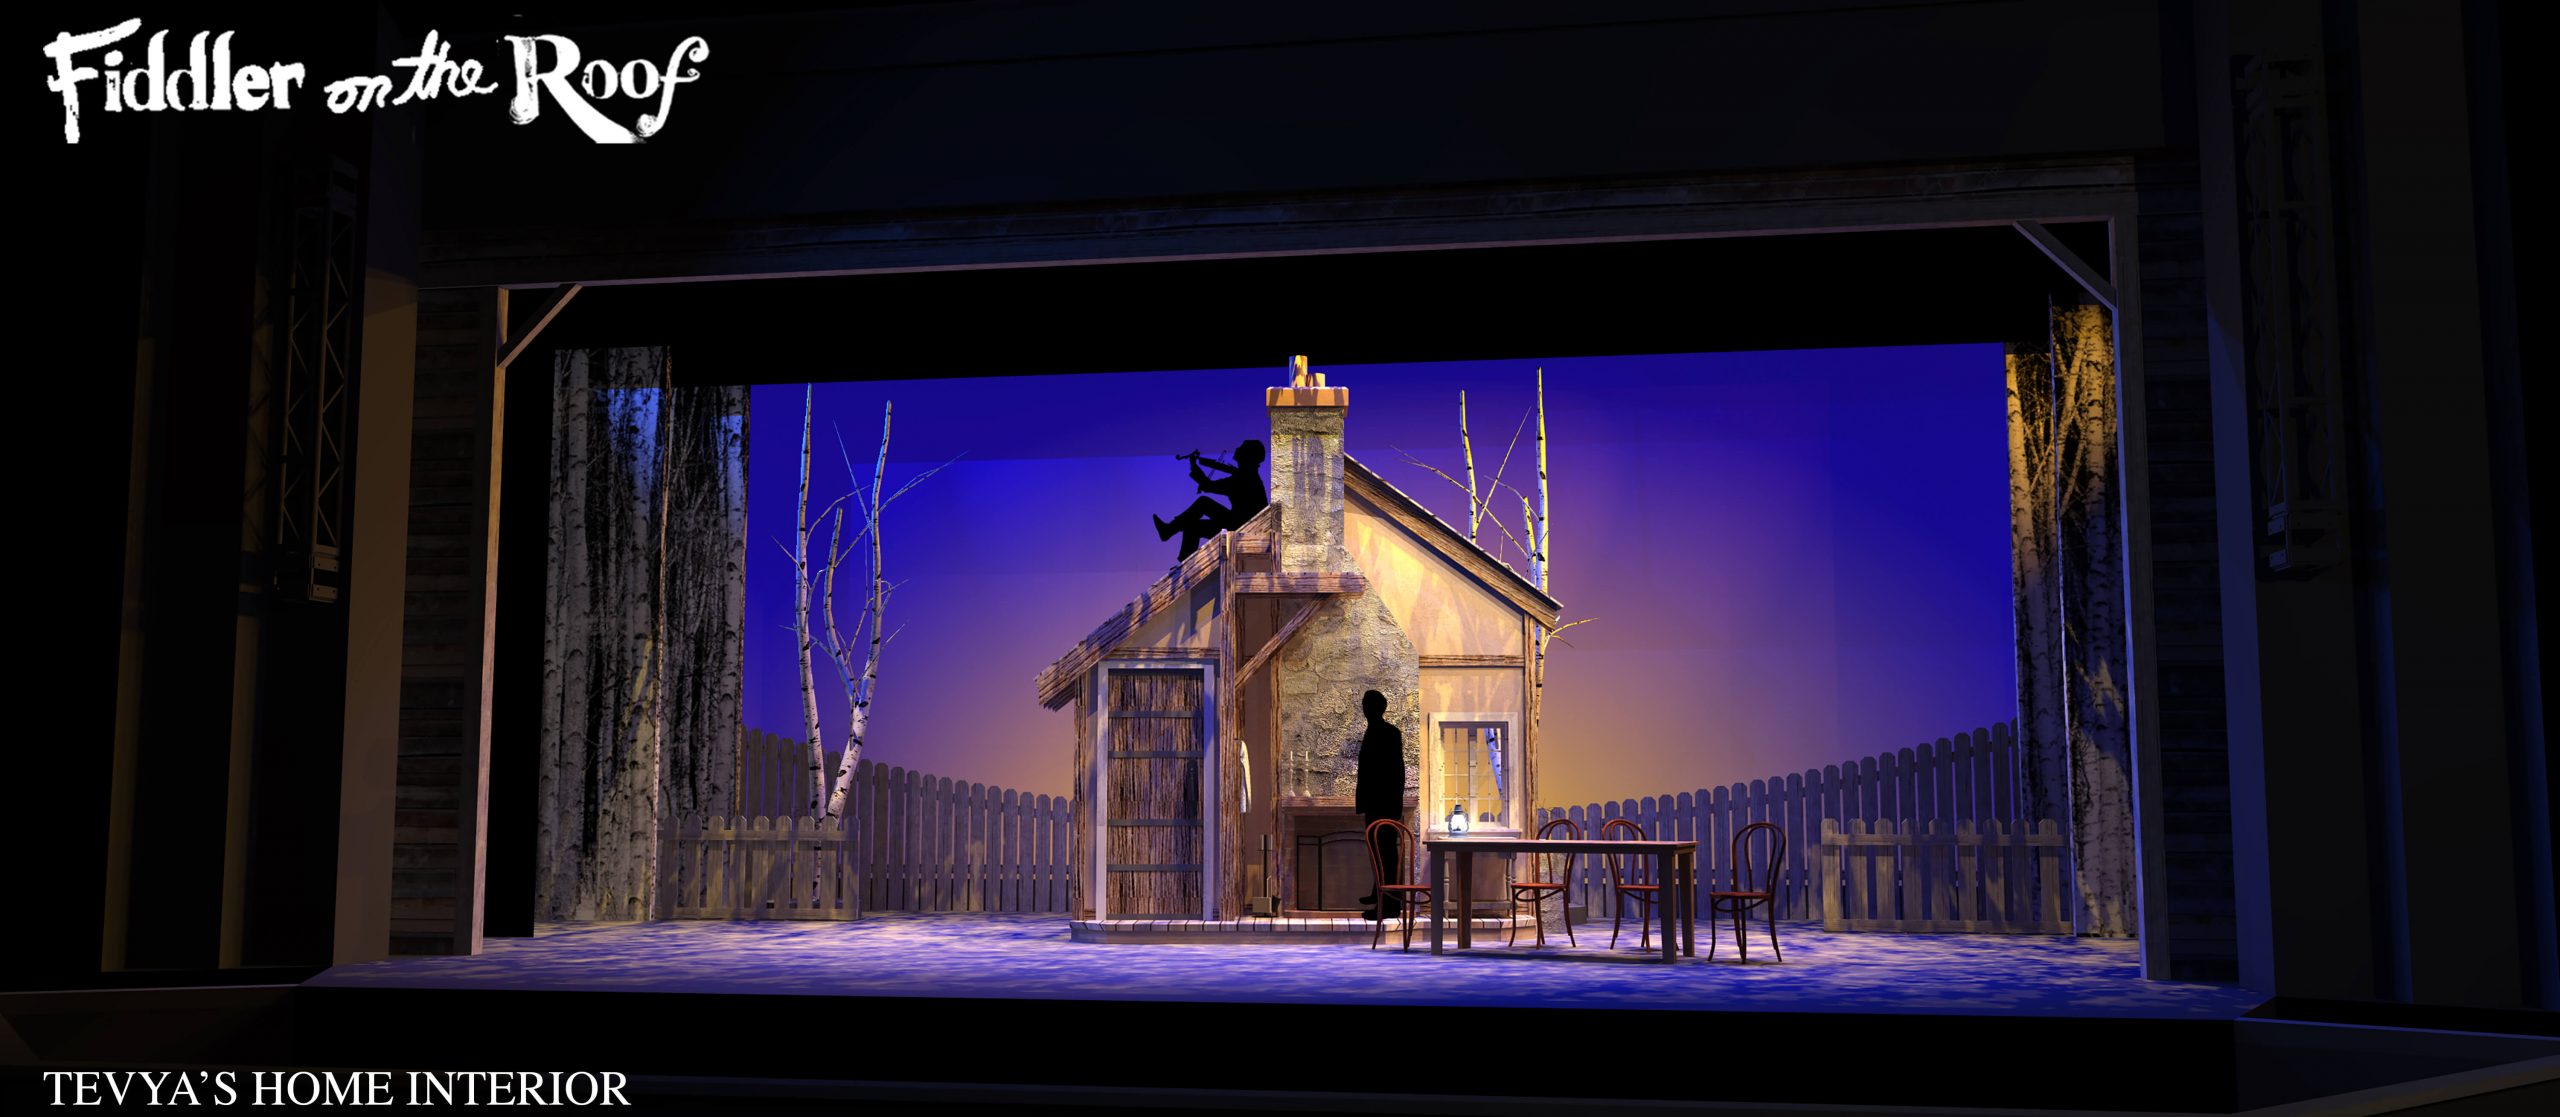 Fiddler on the Roof Musical - Tevya's house interior - scenery rental - Front Row Theatrical